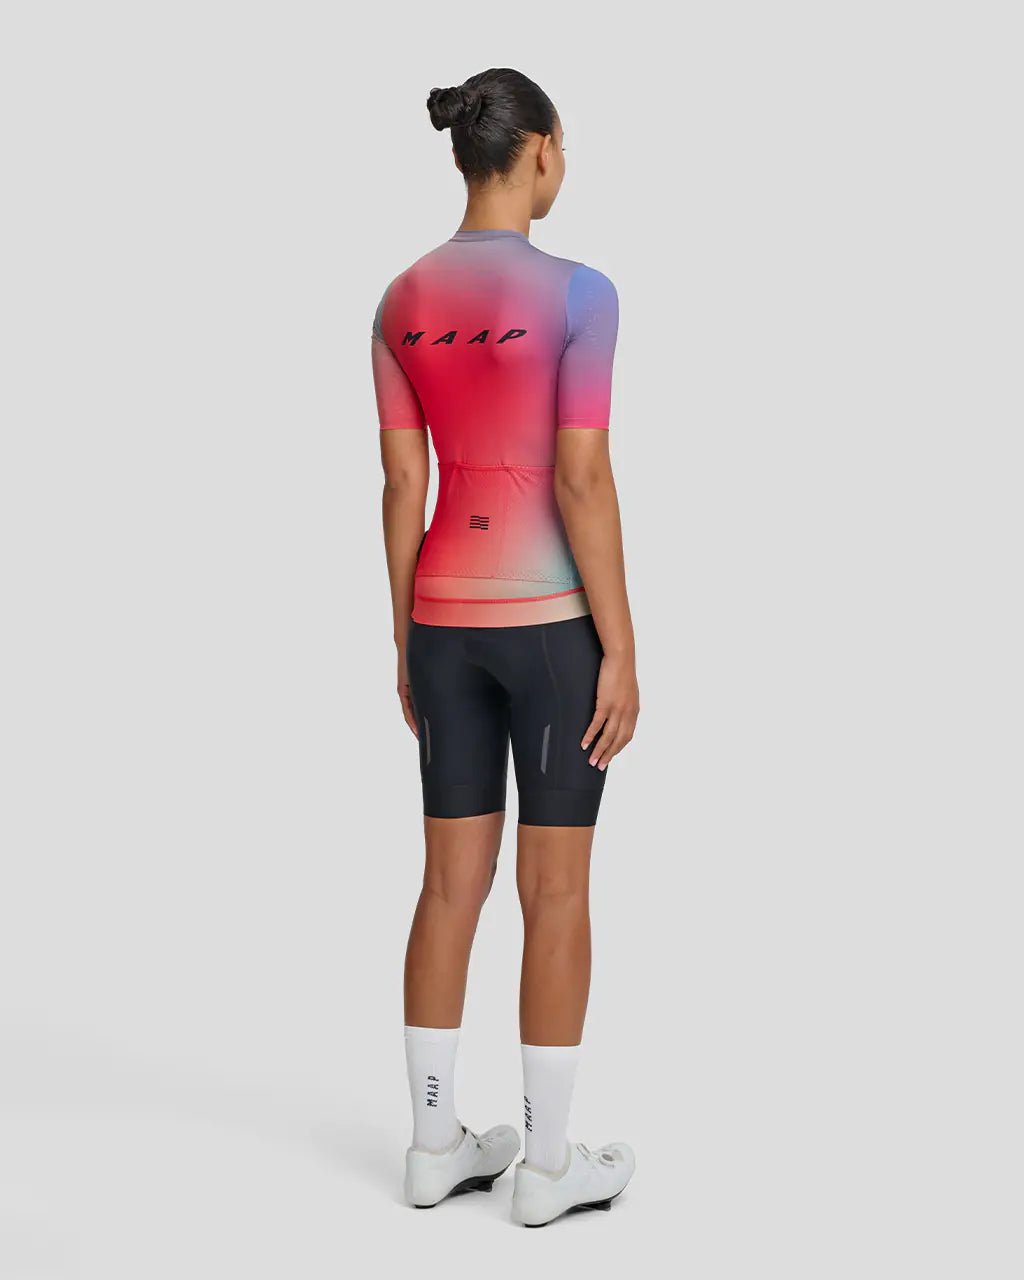 MAAP Women&#39;s Blurred Out Pro Hex 2.0 Red Mix レディースサイクルジャージ | CYCLISM